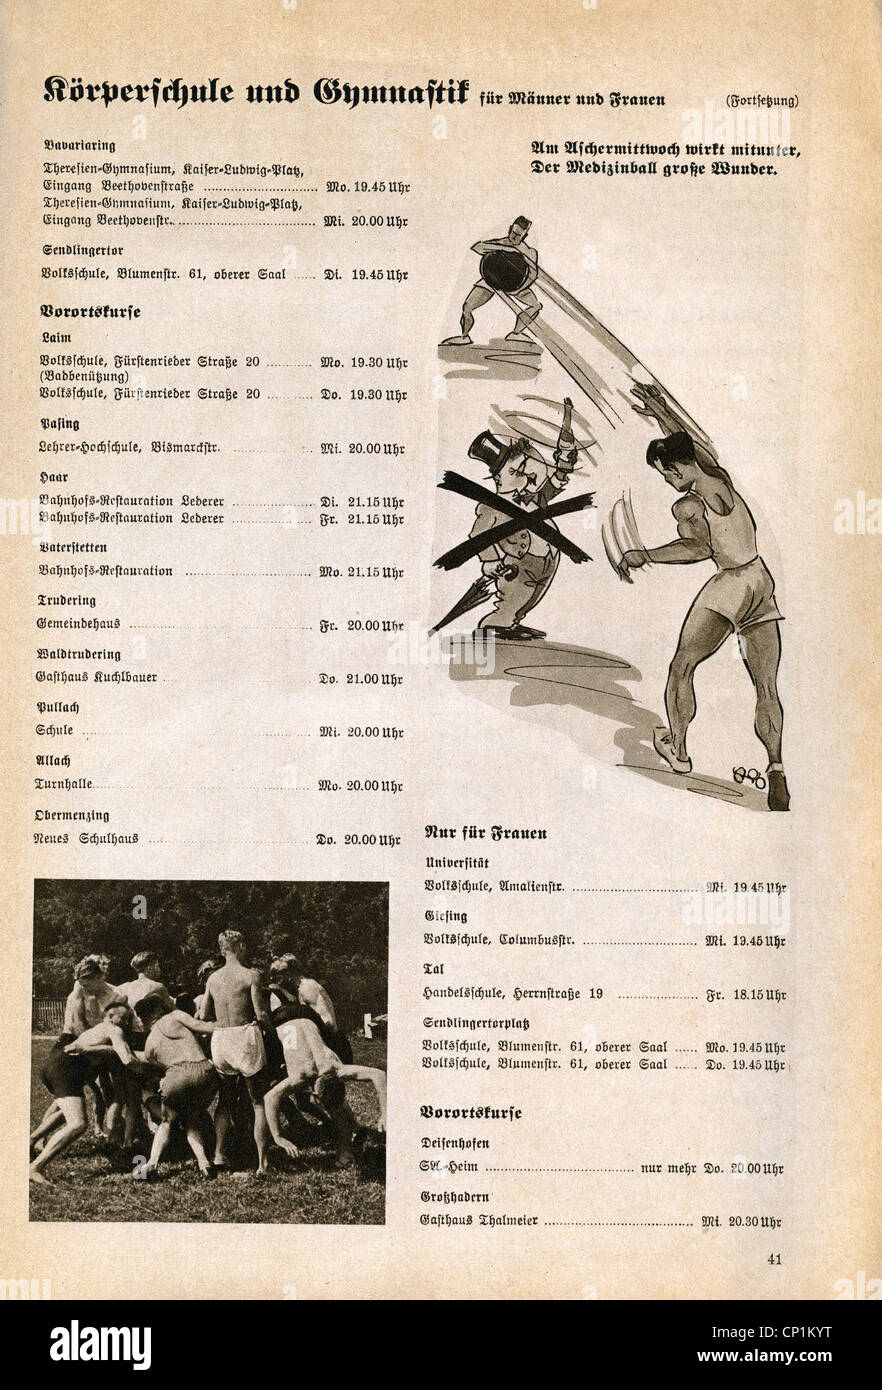 Nazism / National Socialism, organisations, 'Kraft durch Freude' ('Strength through Joy', KdF), sport, curses for bodybuilding ang gymnastics, advert, magazine of Gau Munich Upper Bavaria, March 1938, Additional-Rights-Clearences-Not Available Stock Photo